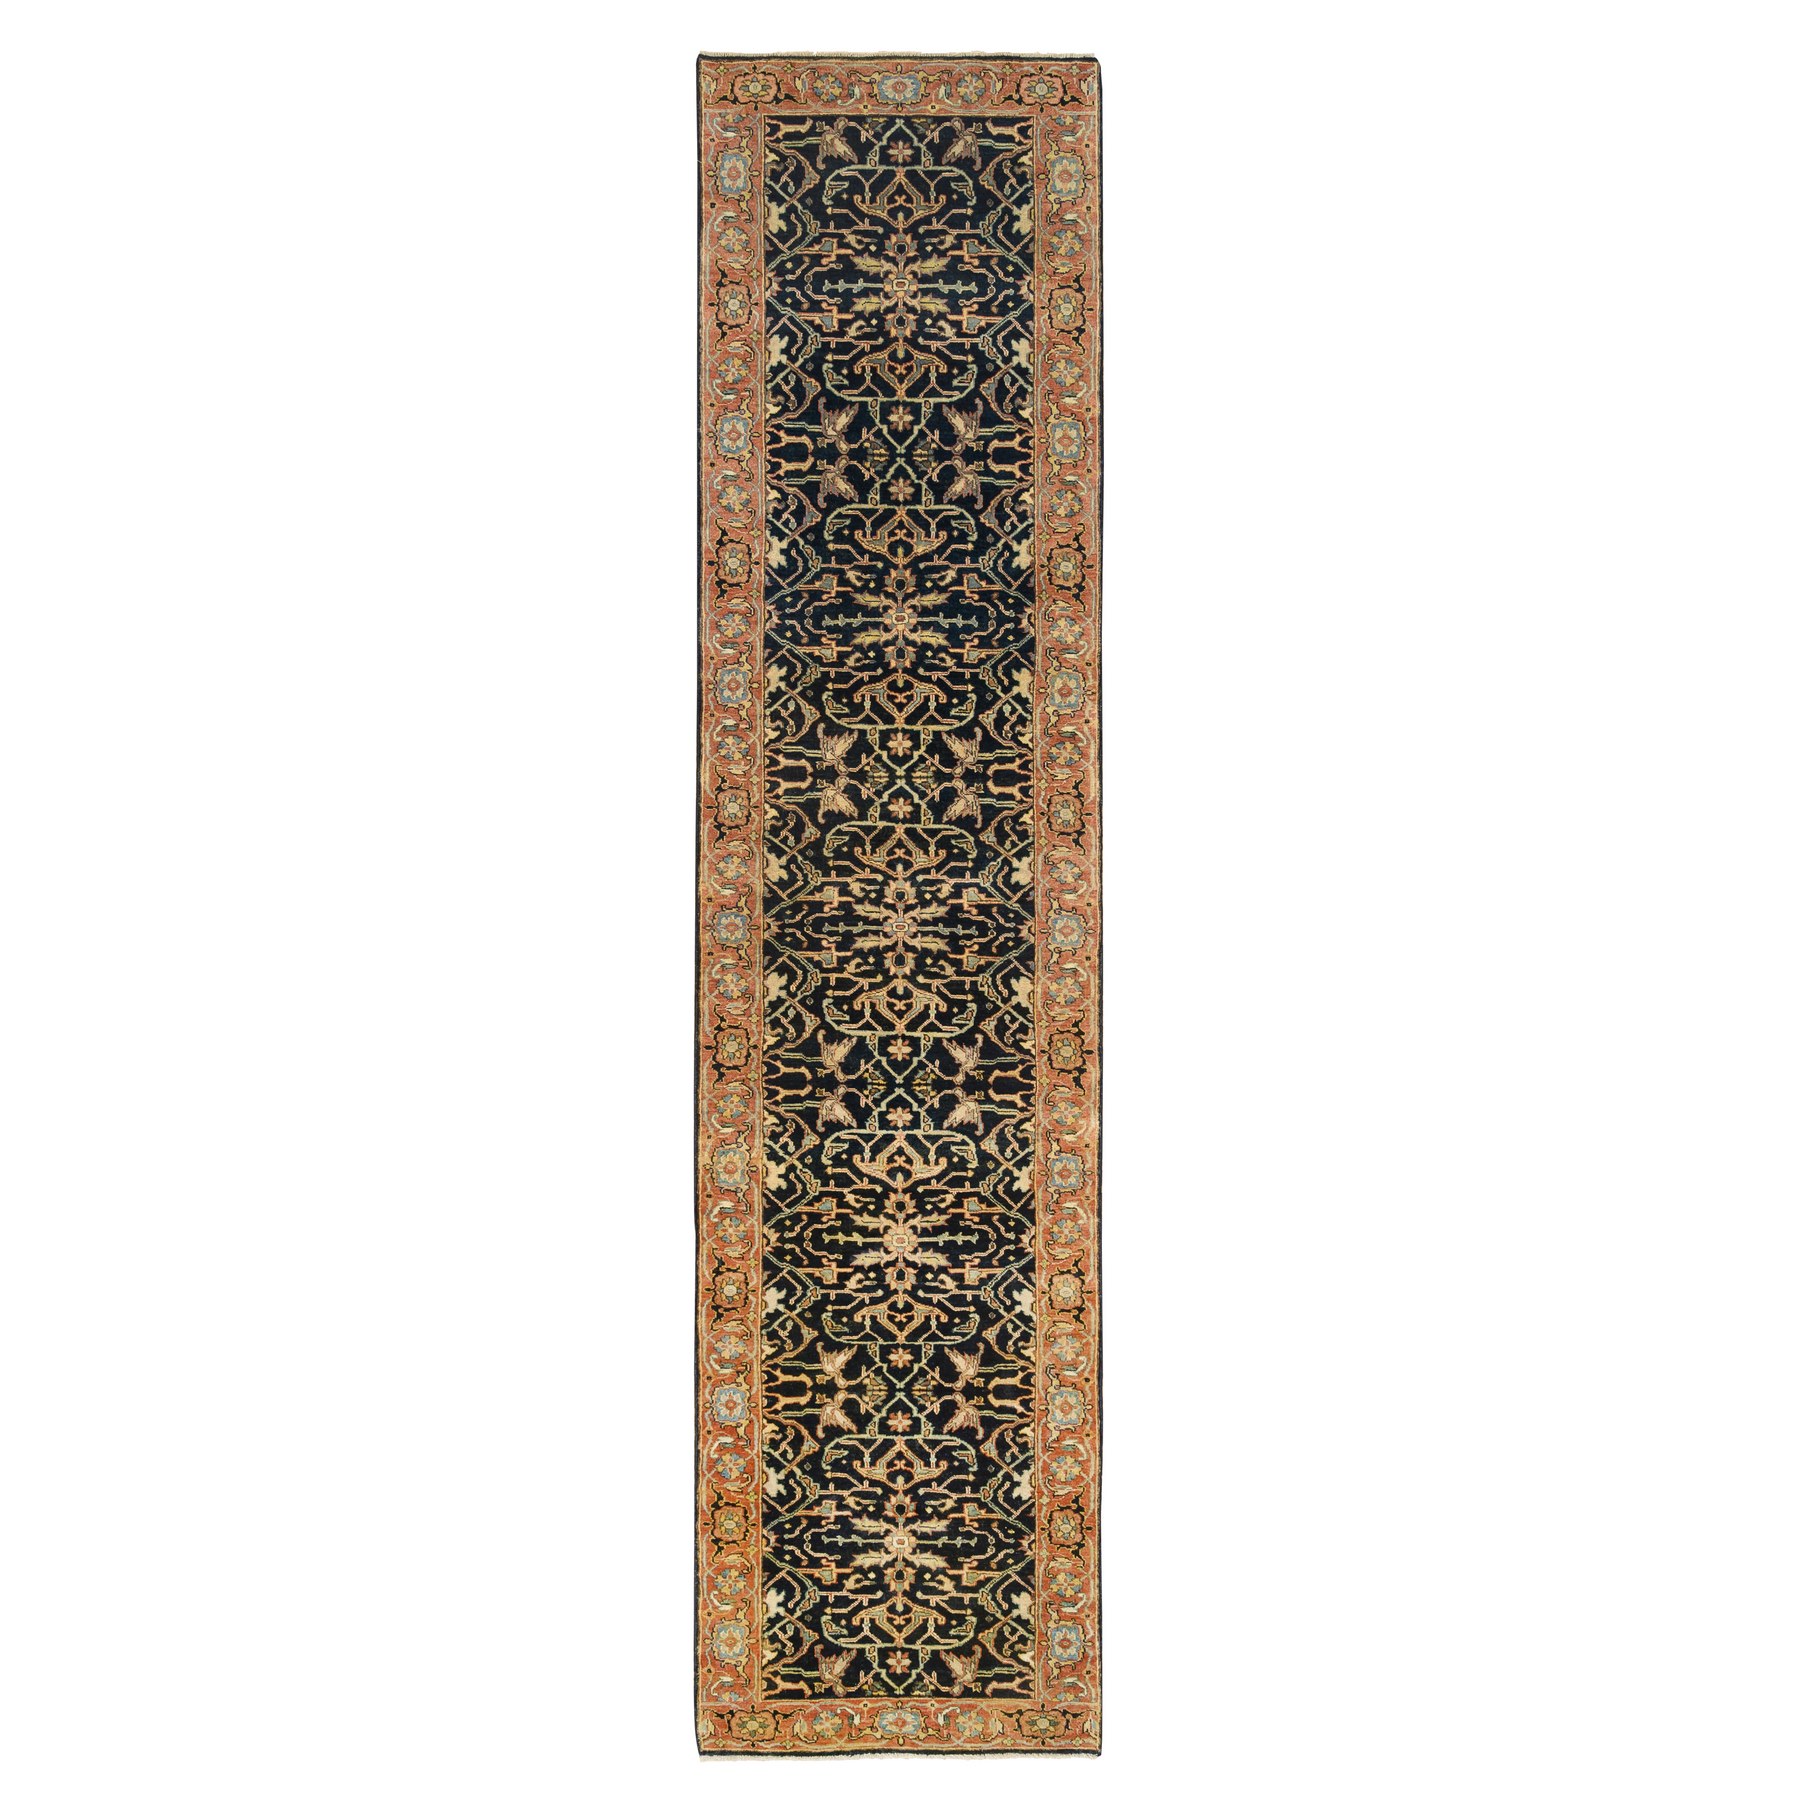  Wool Hand-Knotted Area Rug 2'7